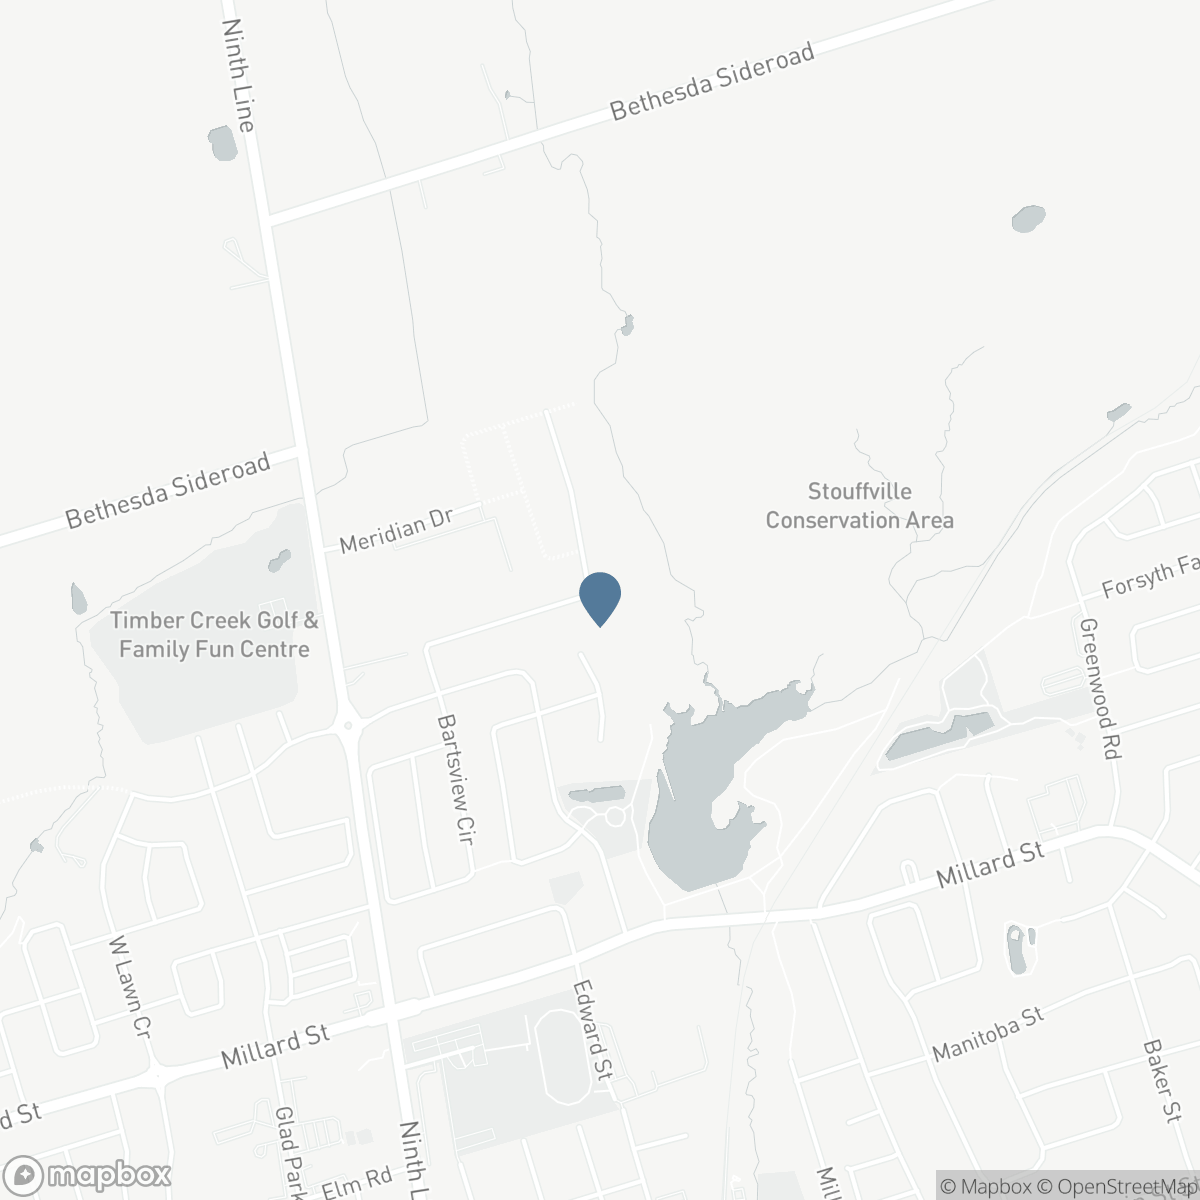 135 STEAM WHISTLE DR, Whitchurch-Stouffville, Ontario L4A 4X5